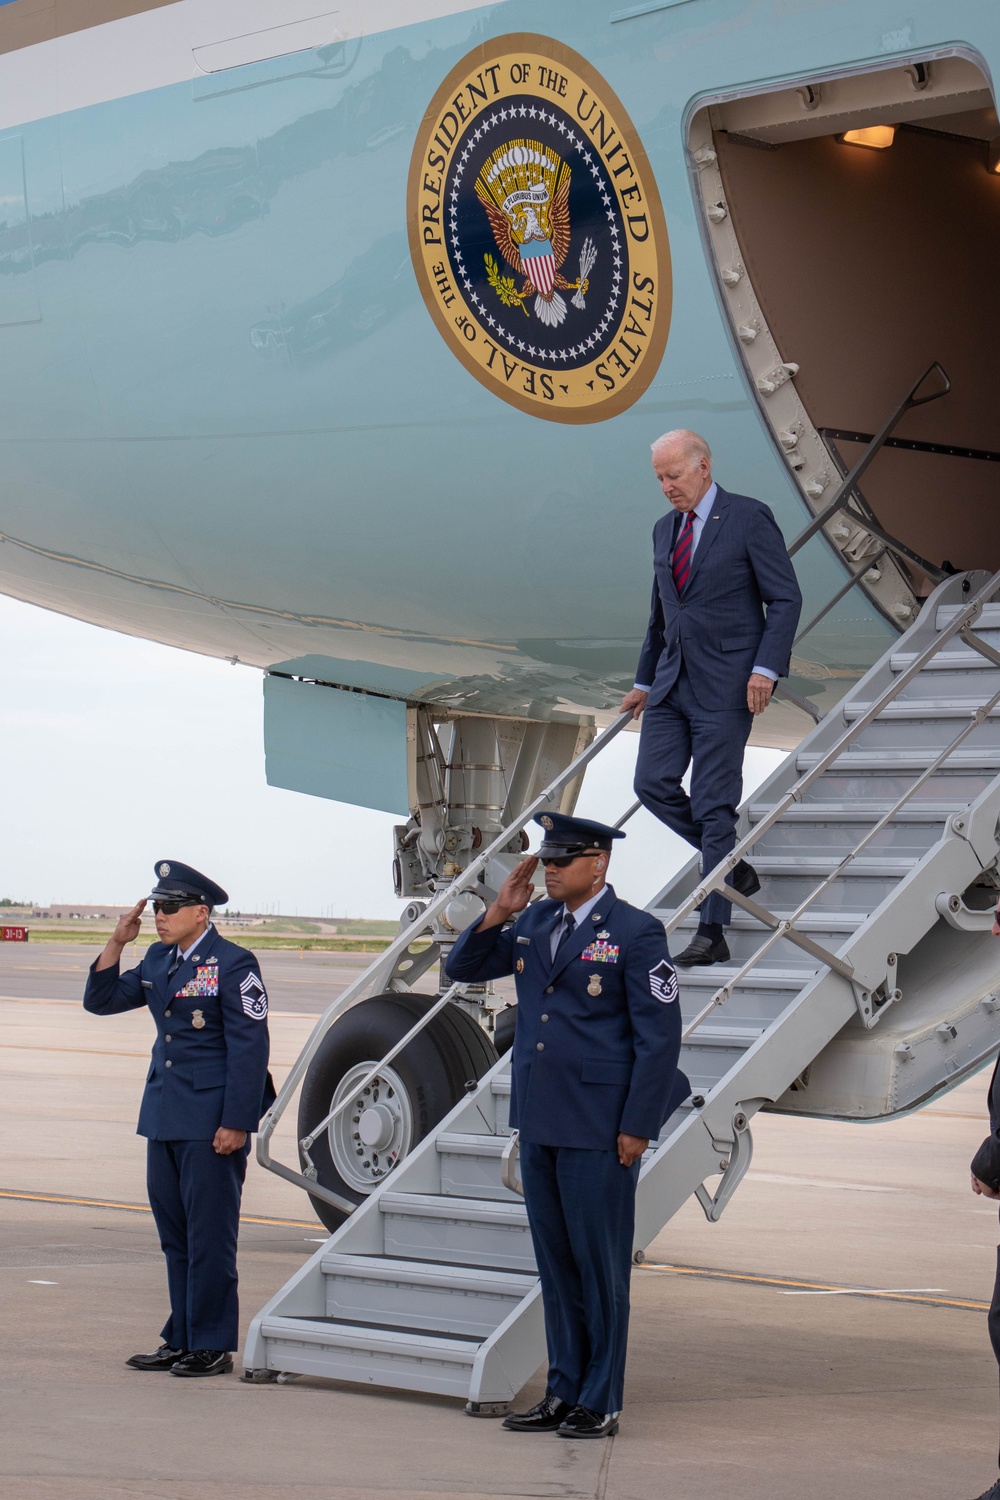 DVIDS - Images - POTUS Arrival at Peterson Space Force Base [Image 3 of 23]